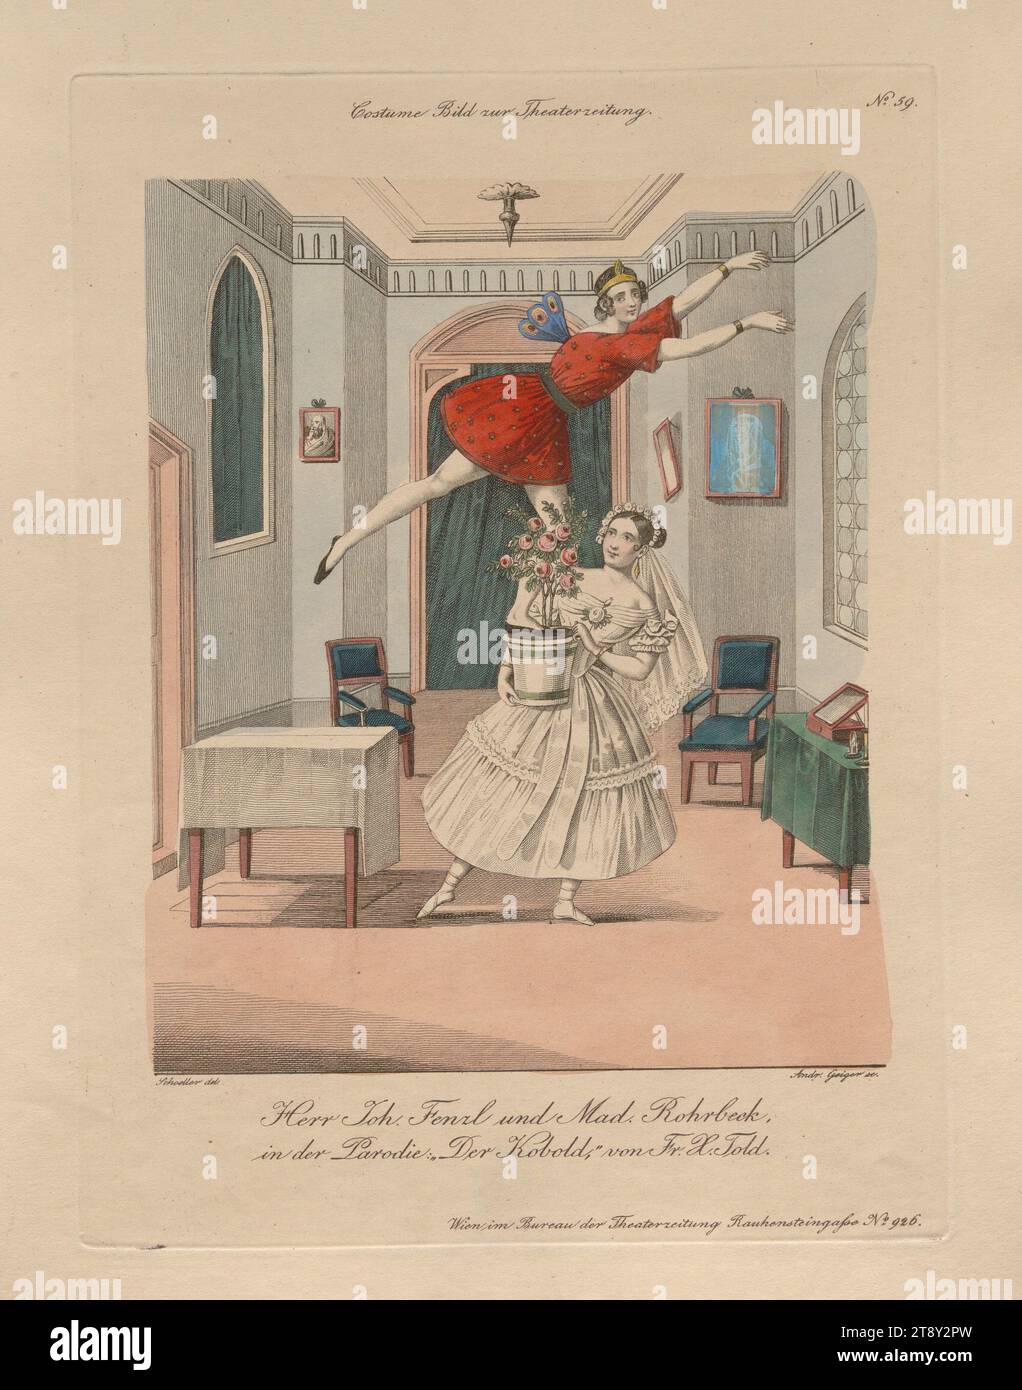 Mr. Joh. Fenzl and Mad. Rohrbeck in the parody 'The Goblin' by Fr. Told (costume picture No. 59 for the theater newspaper), Andreas Geiger (1765-1856), copper engraver, 1838, colorised, copperplate engraving, sheet size 30×23, 4 cm, Theatre, Performing arts, Fine Arts, actor (on the stage), The Vienna Collection Stock Photo